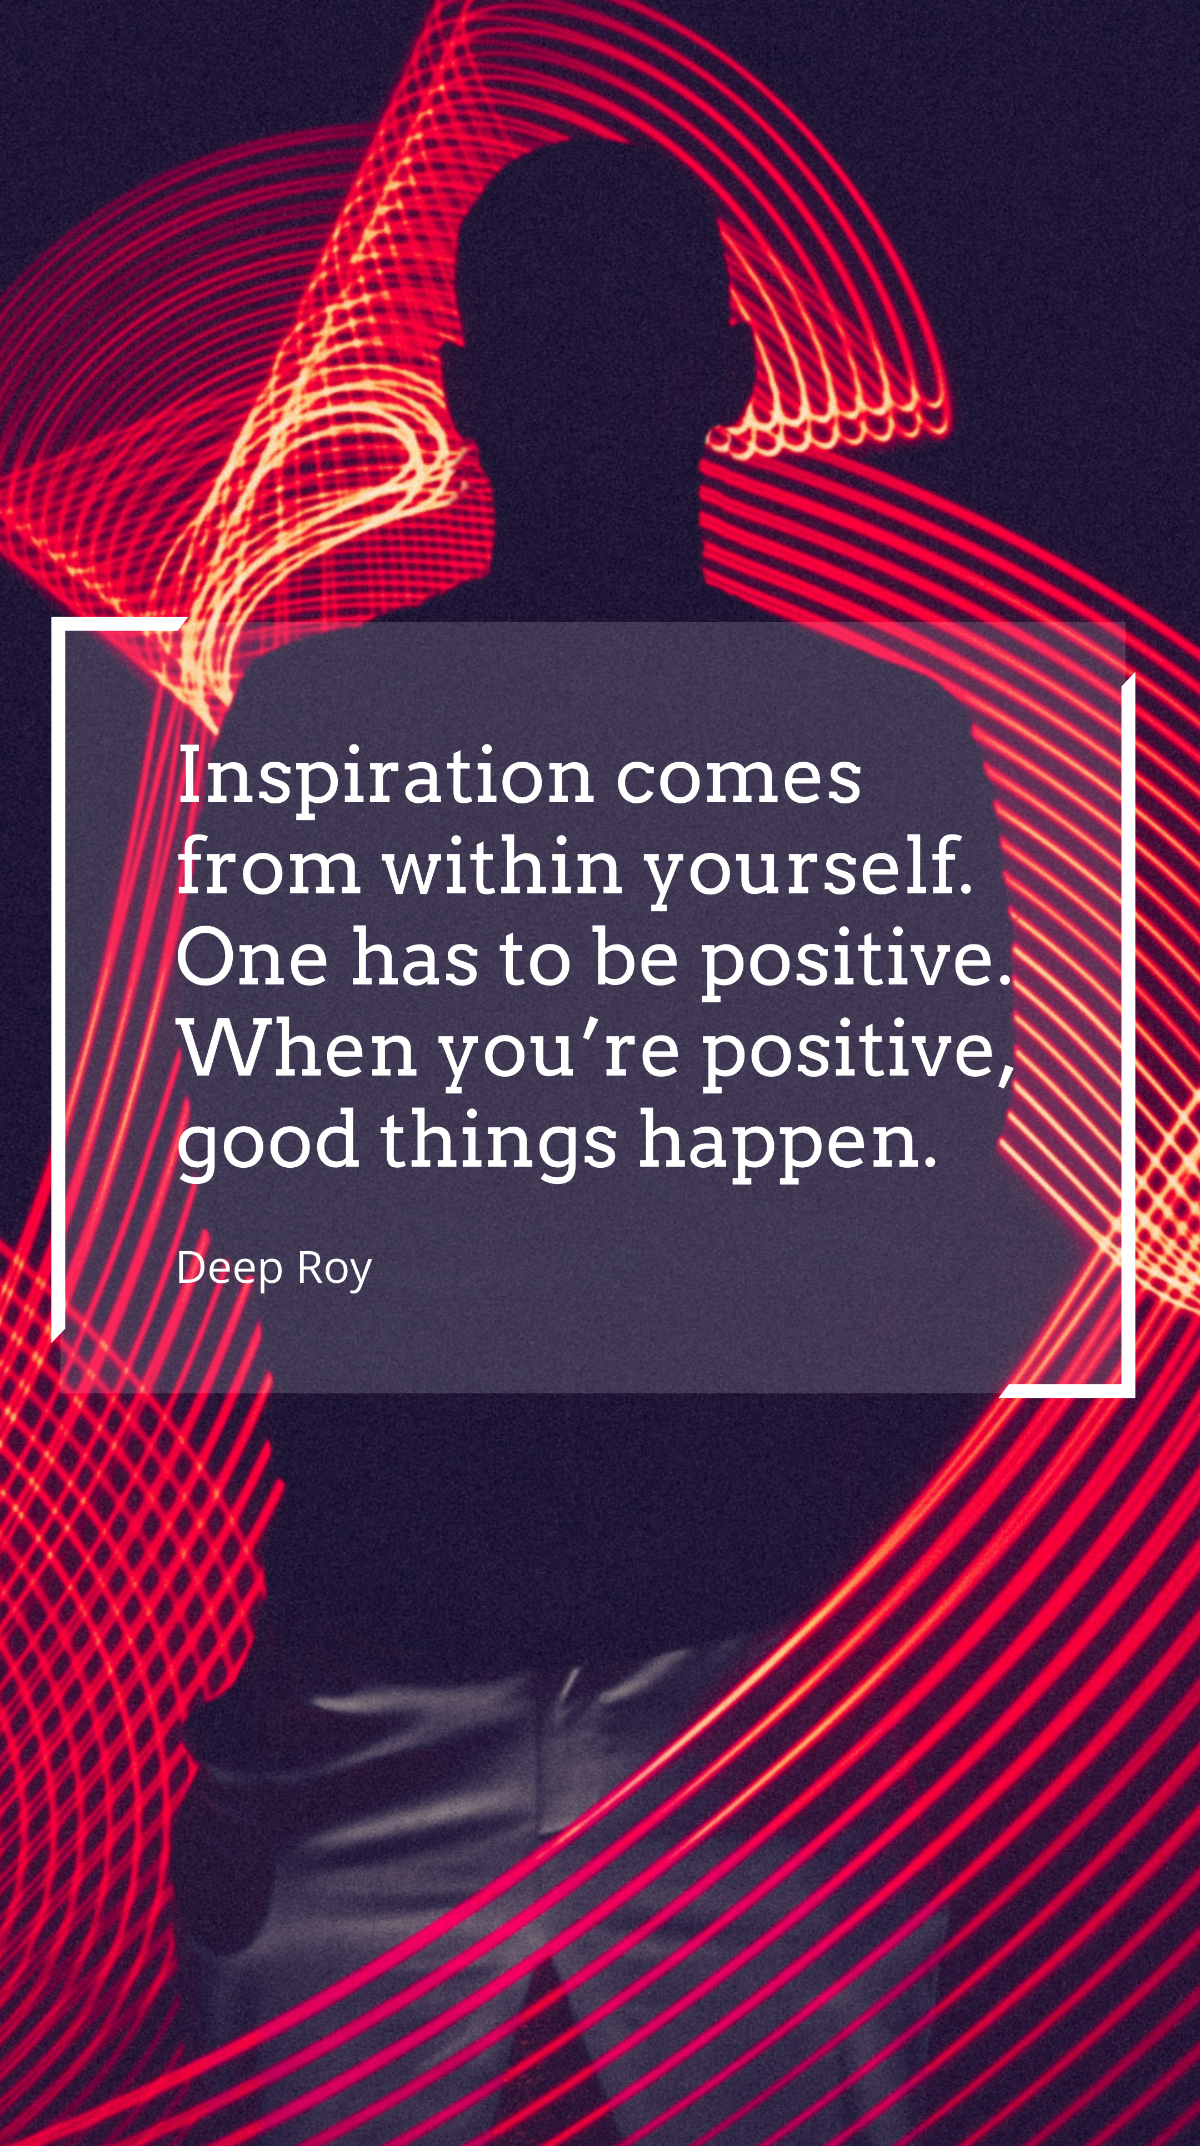 Deep Roy - Inspiration comes from within yourself. One has to be positive. When you’re positive, good things happen. Template